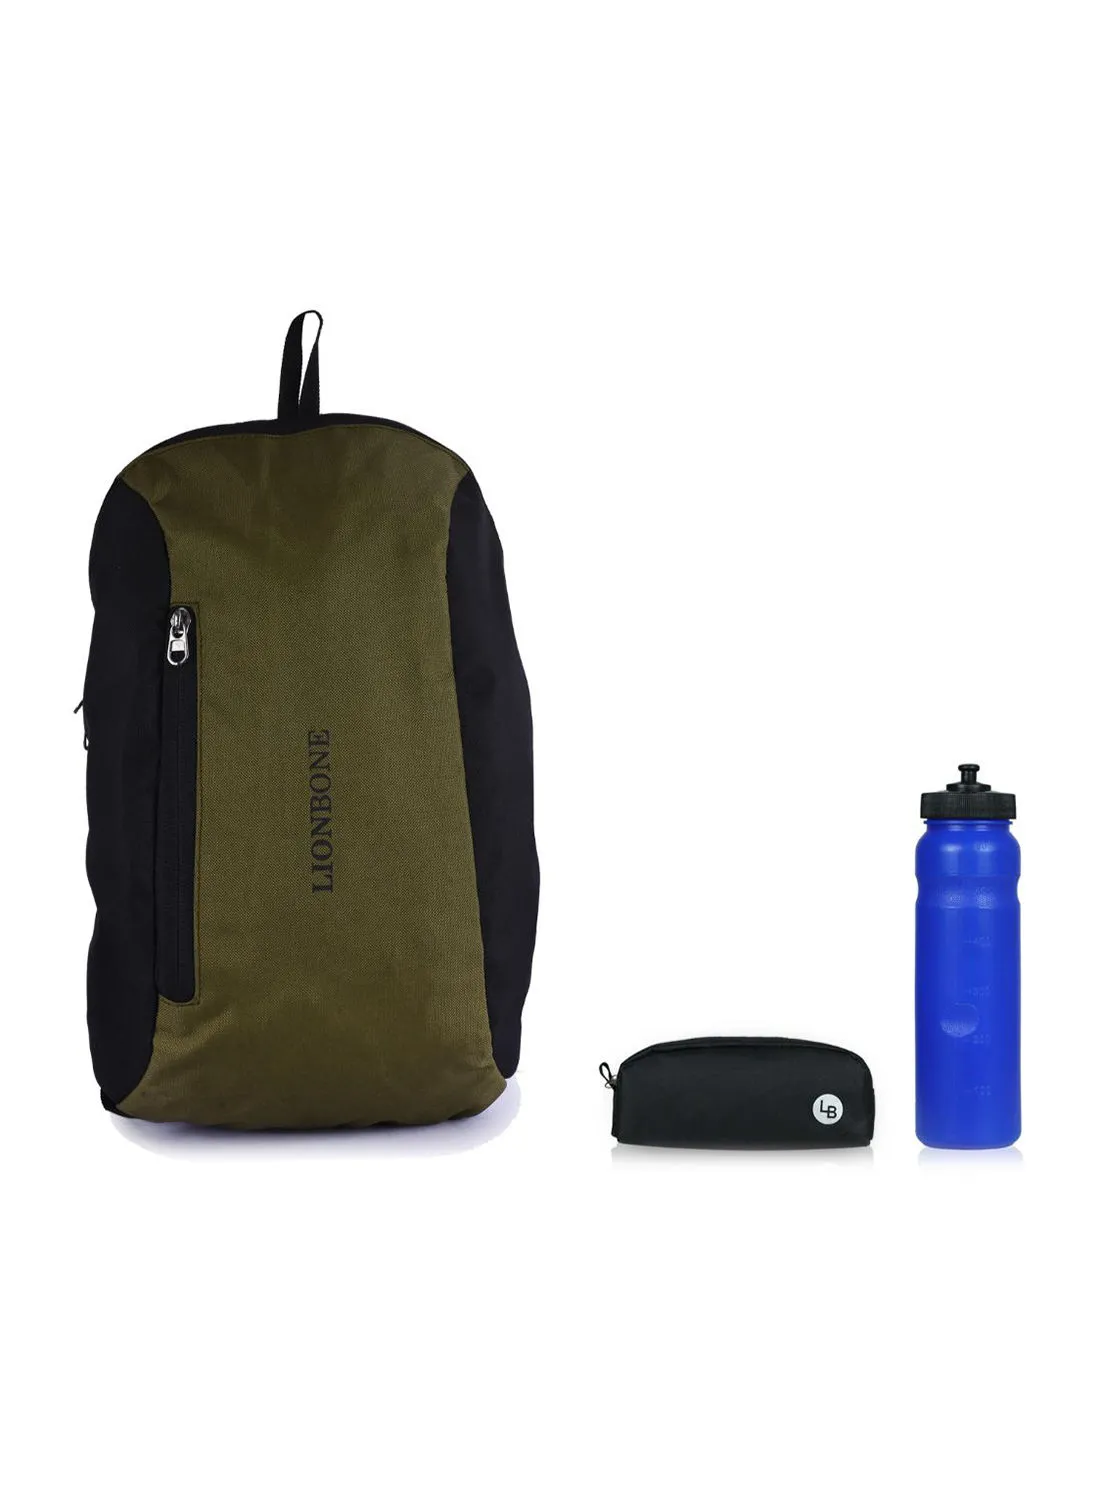 LIONBONE Combo of Backpack, Pouch and Sipper Green/Black